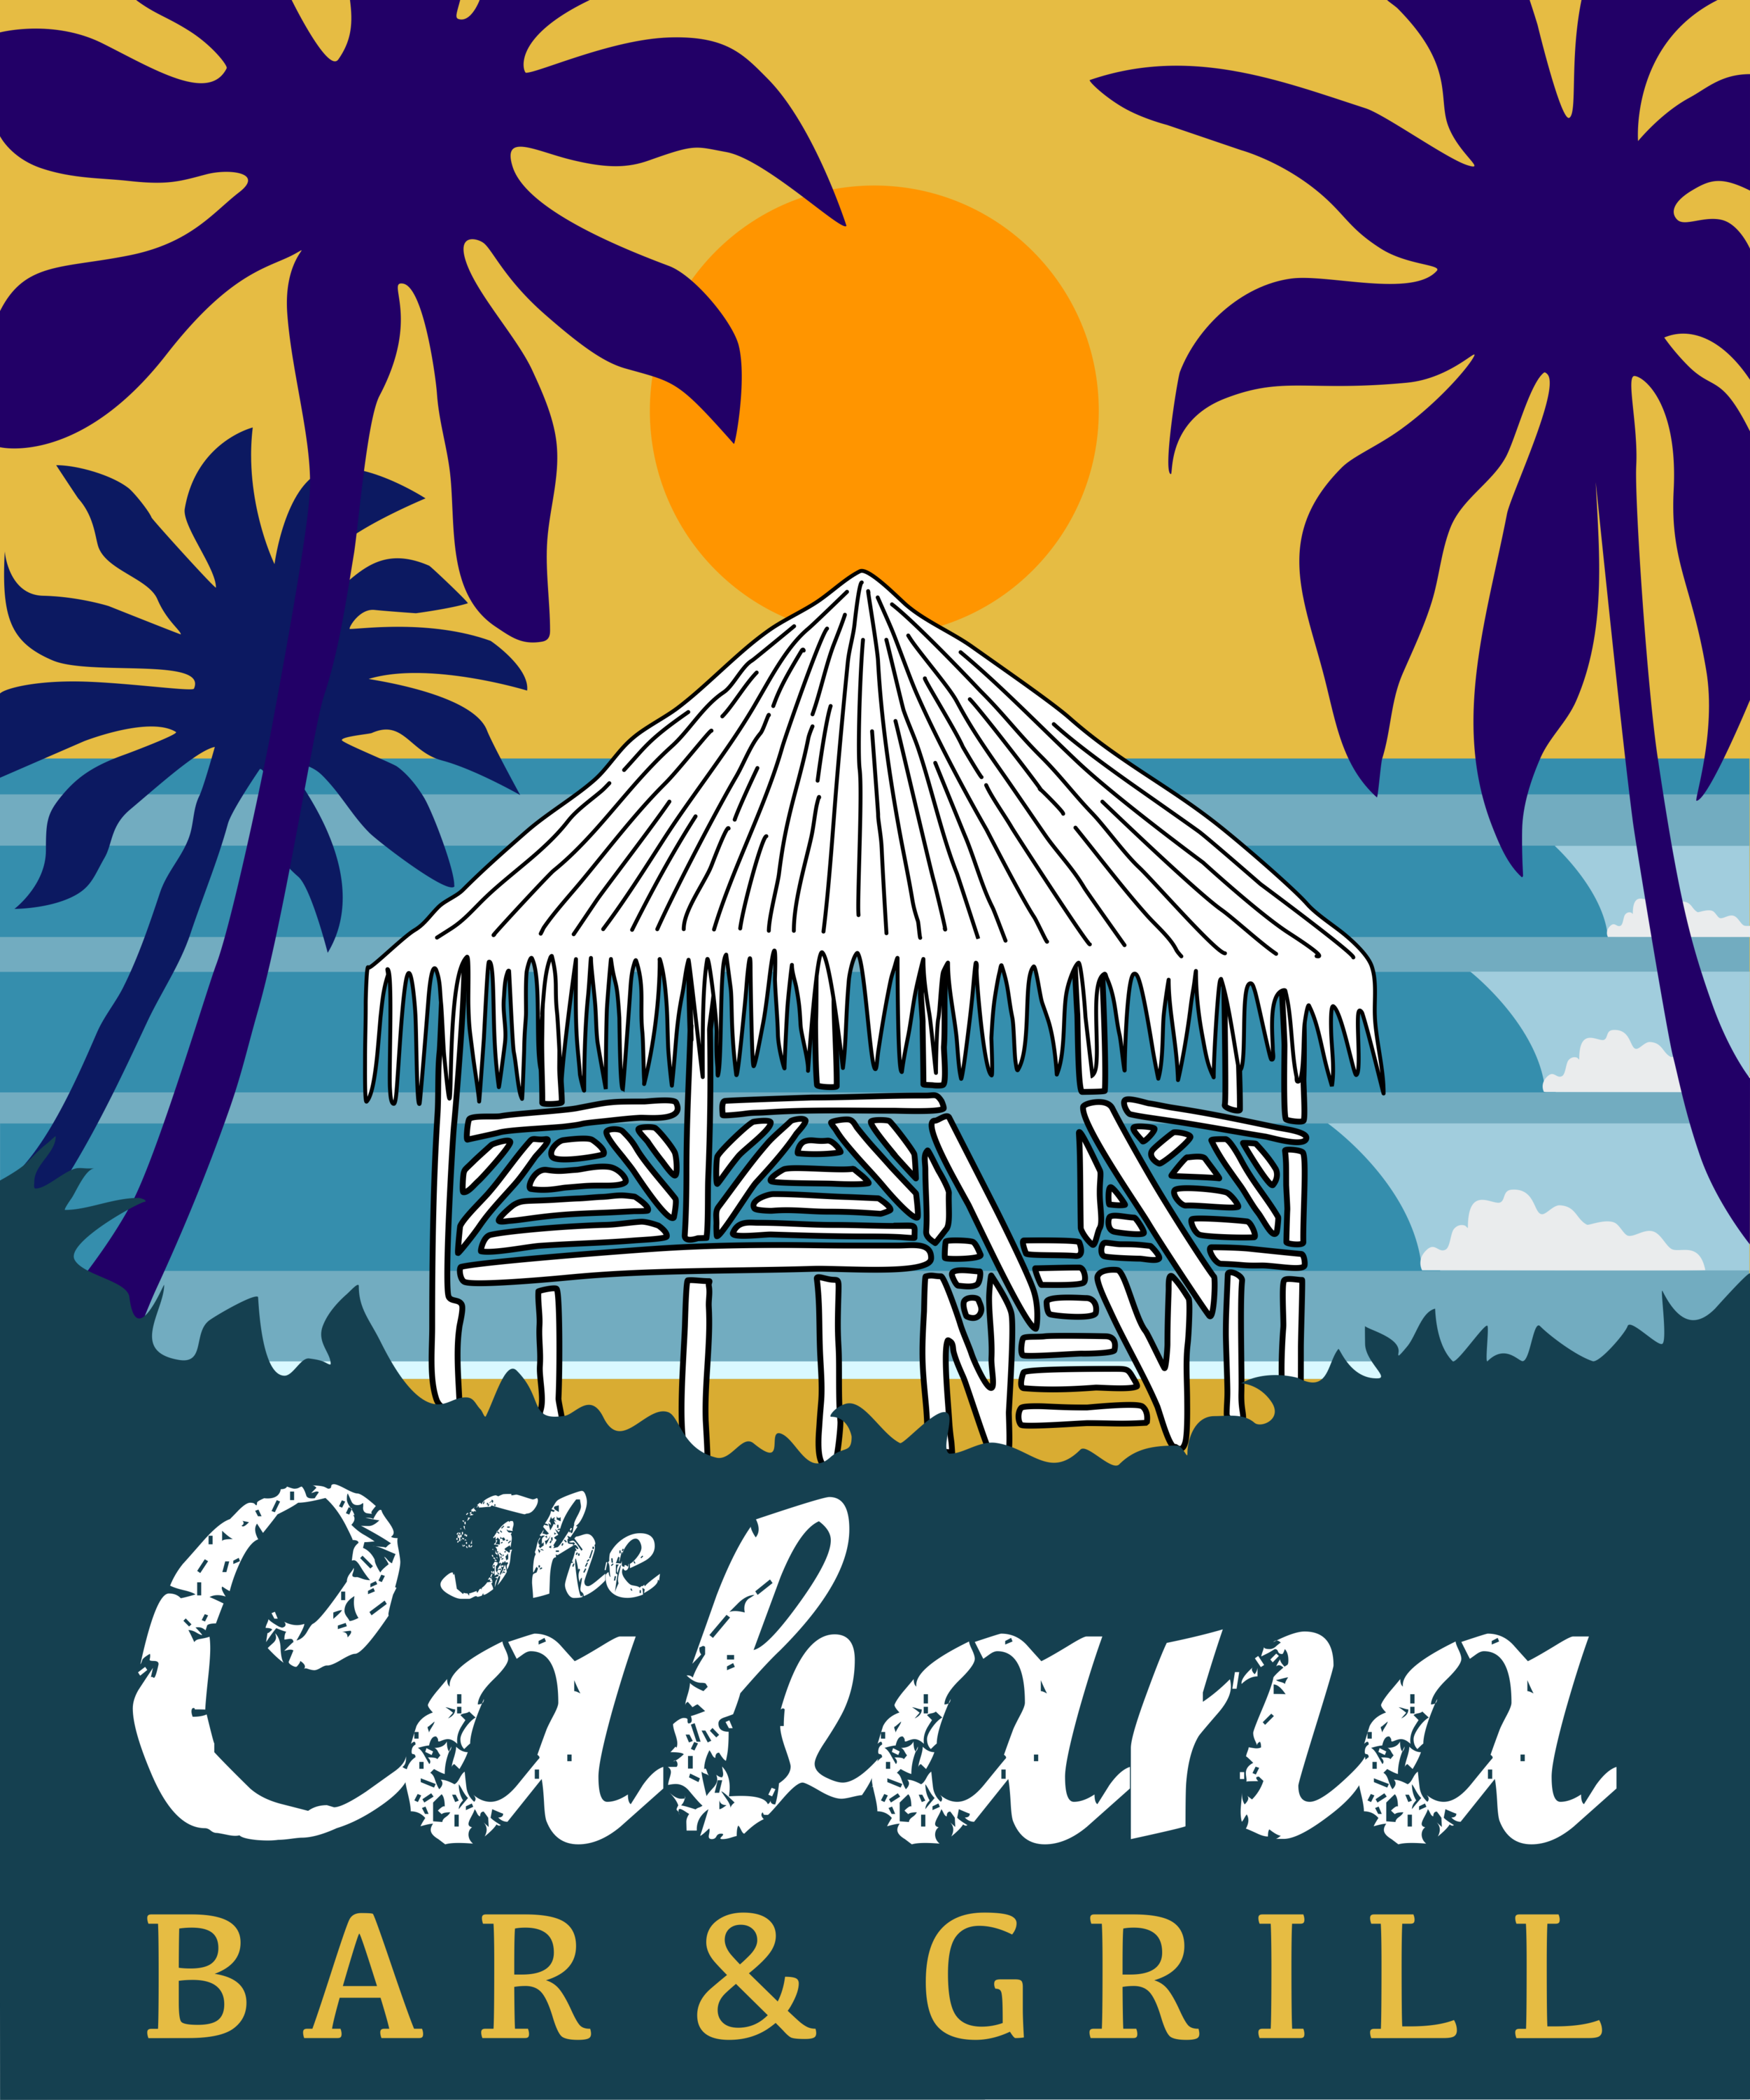 The Cabana Bar and Grill